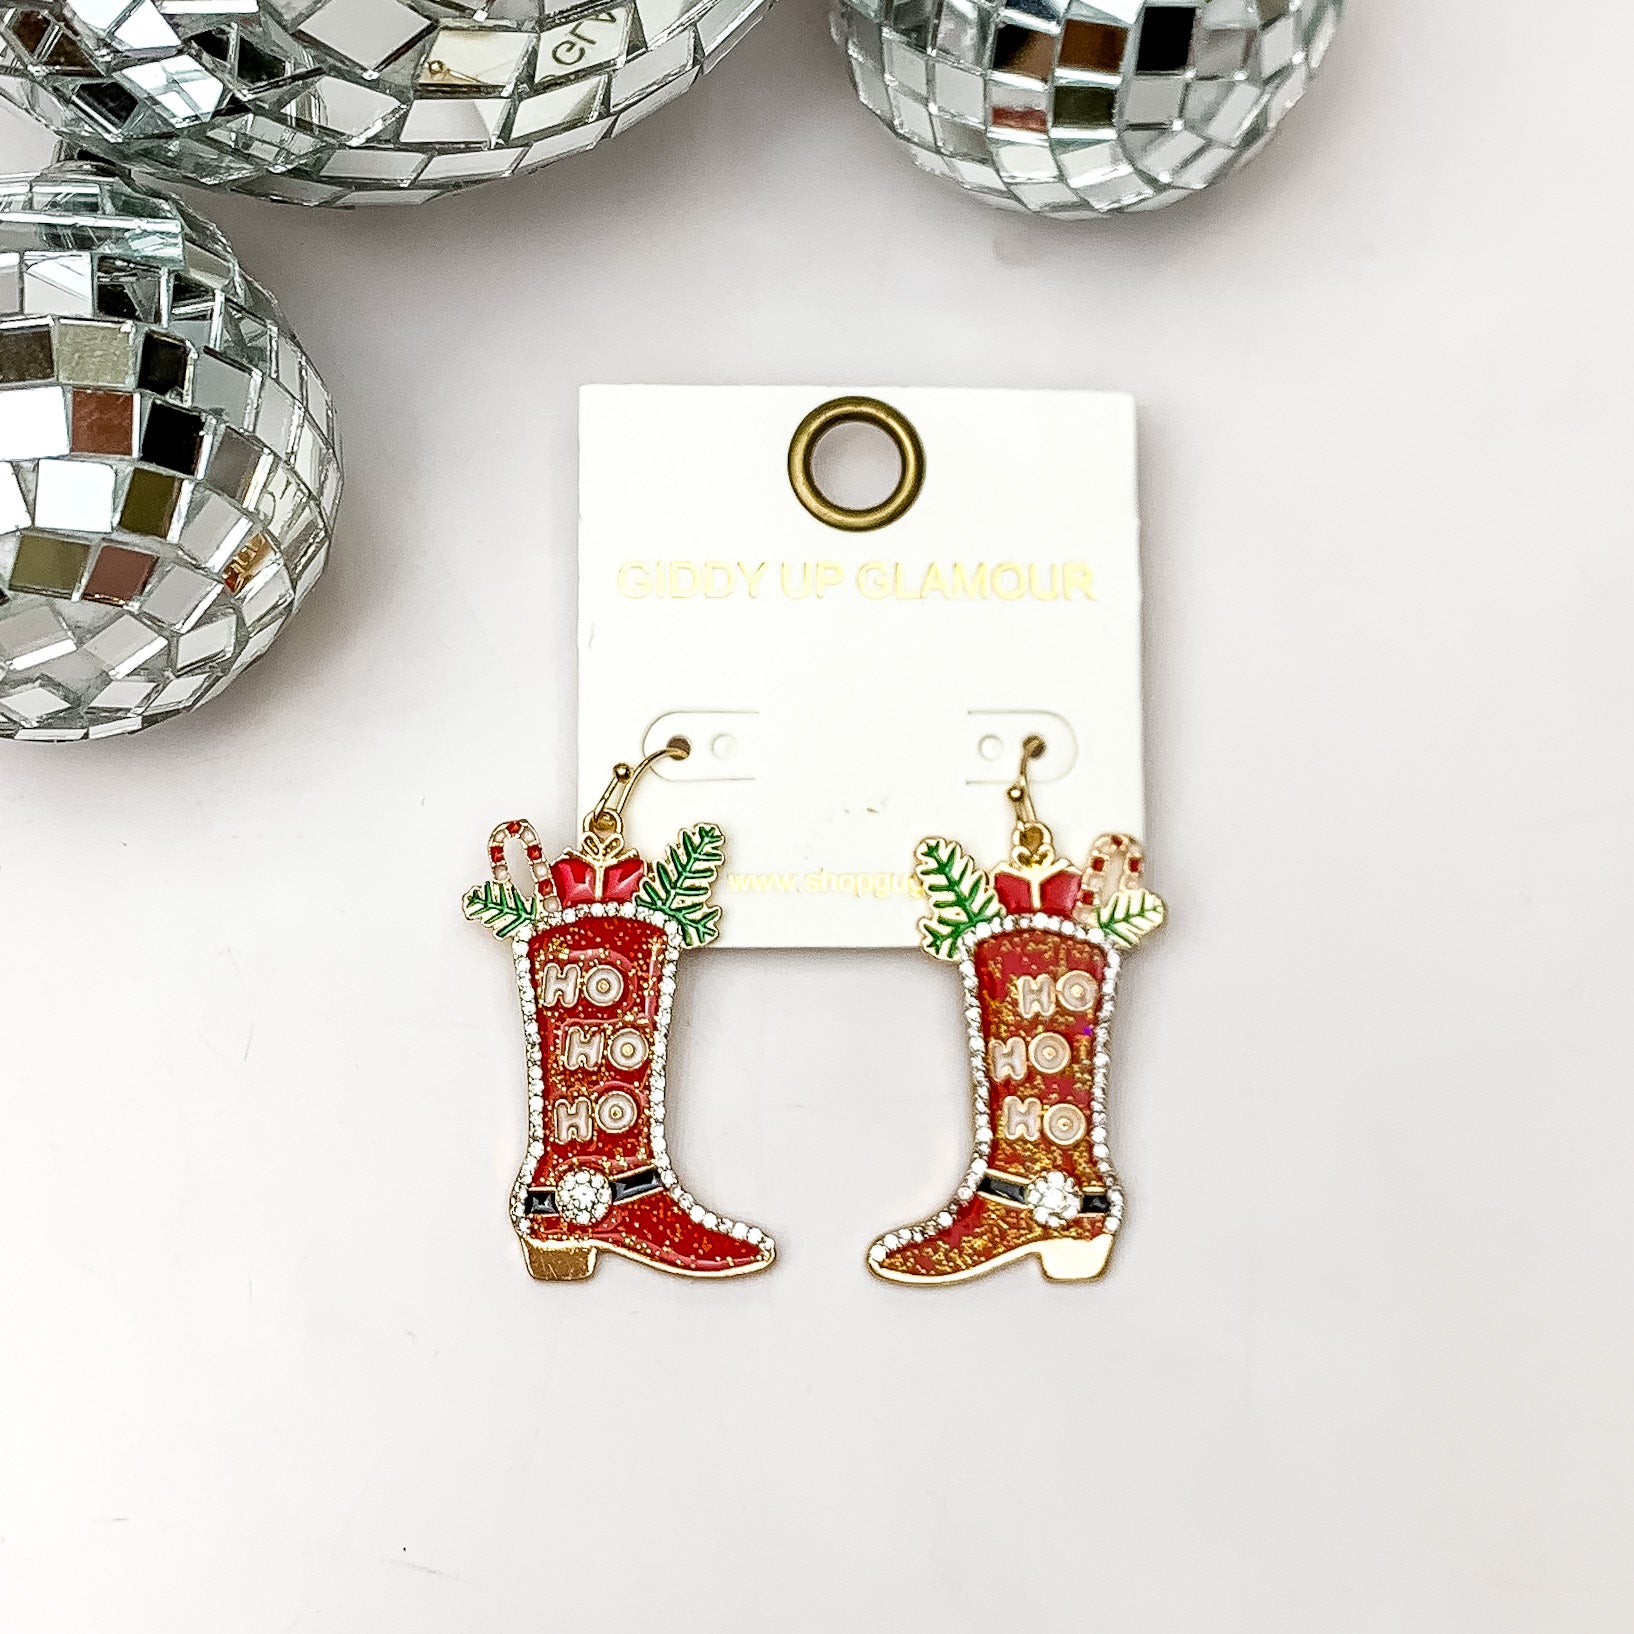 HO HO HO Cowboy Boot Drop Earrings in Red - Giddy Up Glamour Boutique